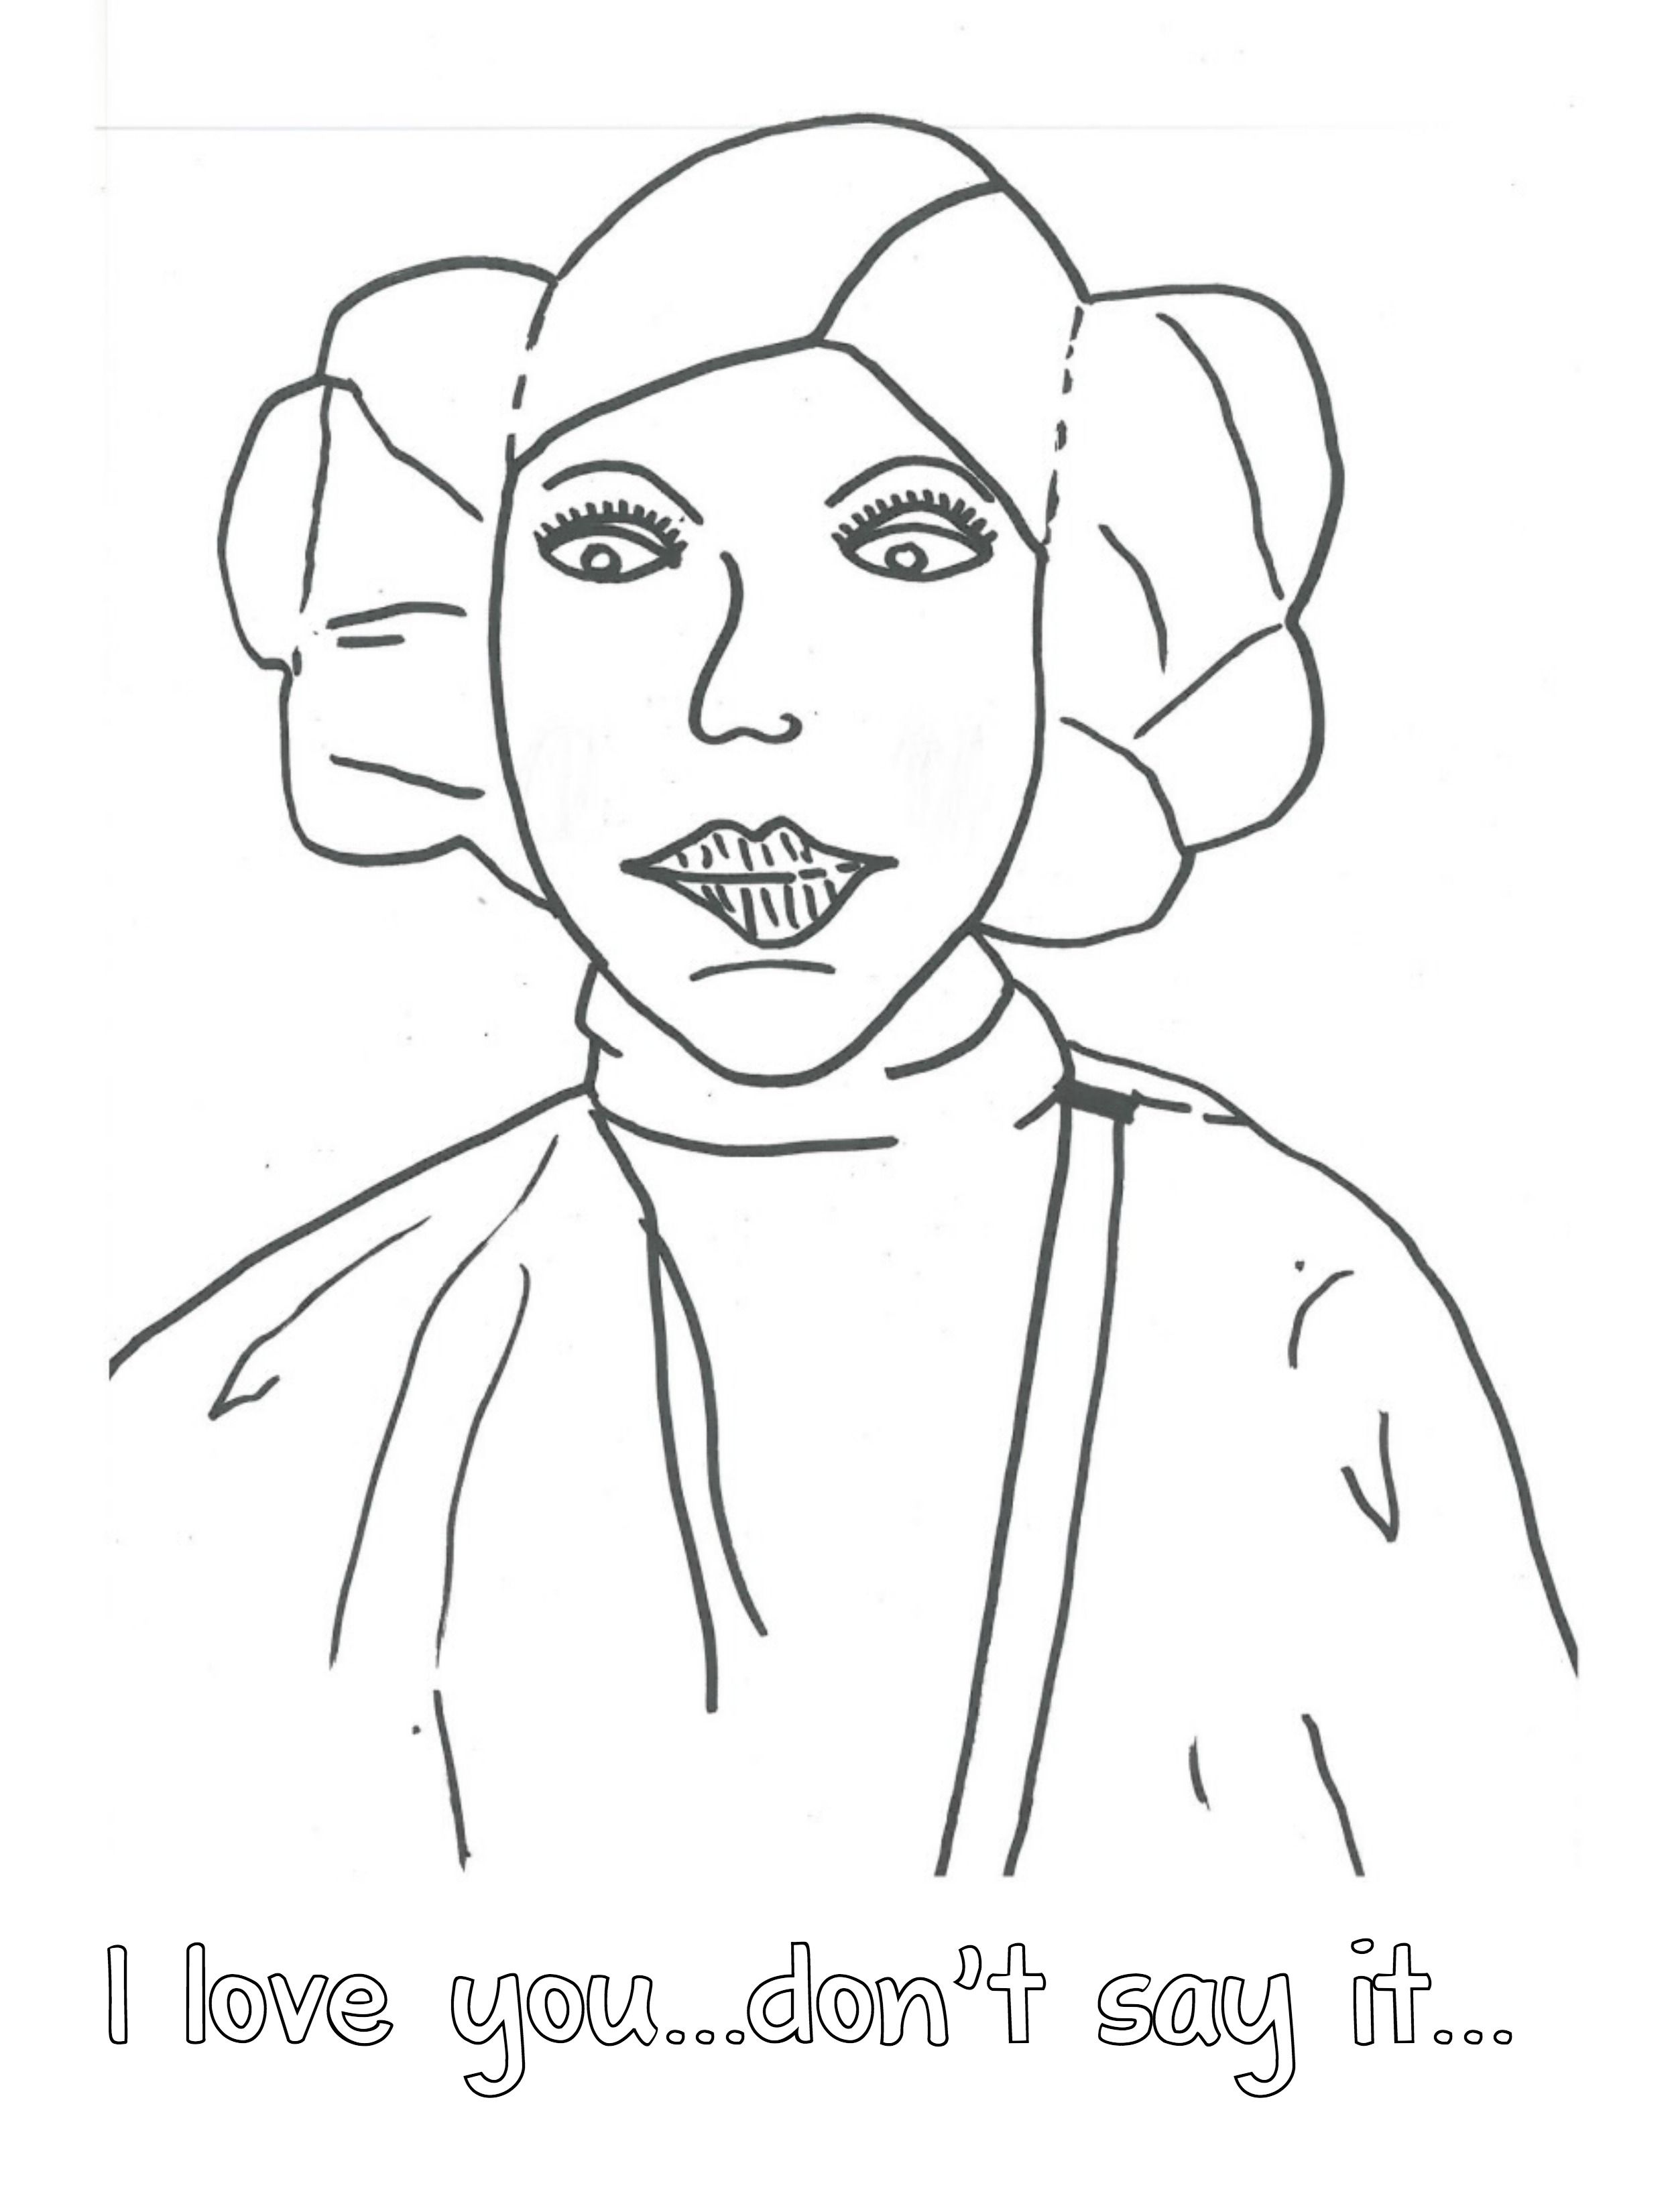 8 More Star Wars Inspired Valentines Coloring Pages - Page 7 of 9 ...